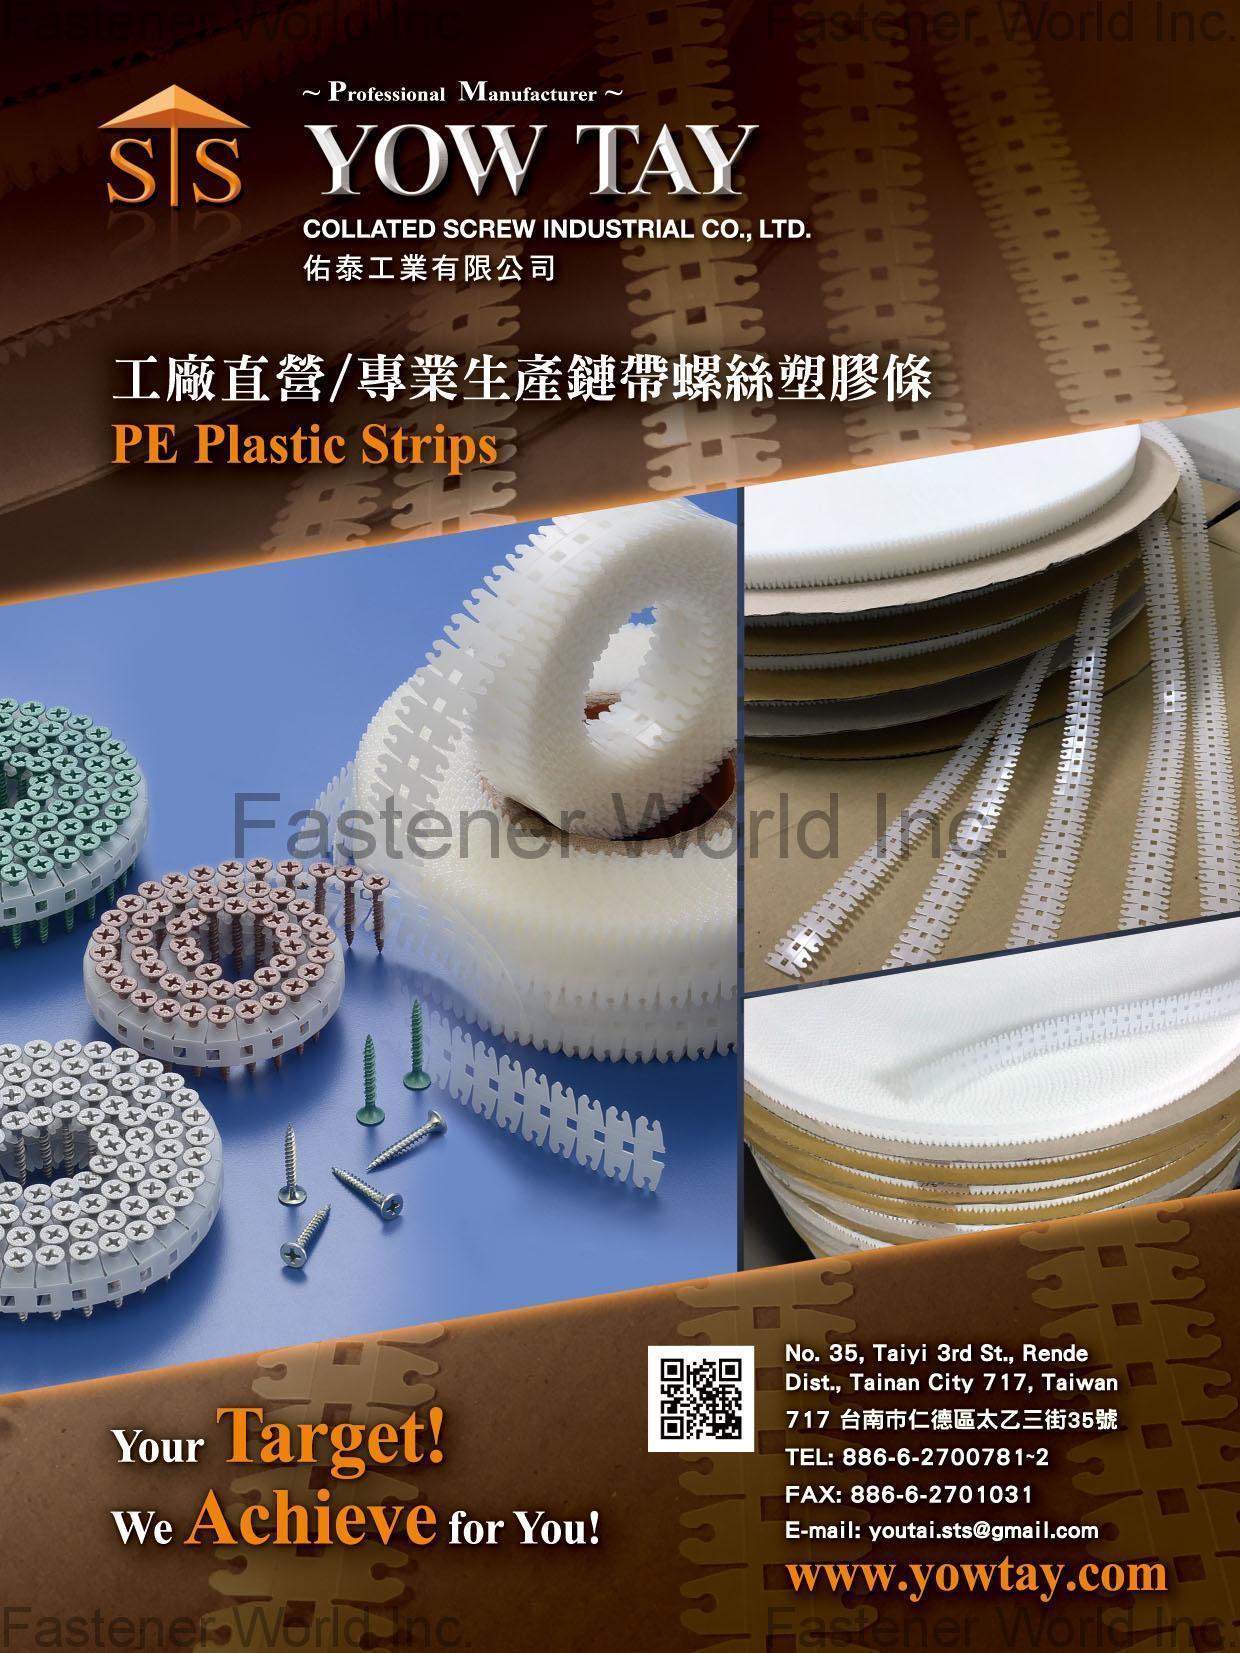 YOW TAY COLLATED SCREW INDUSTRIAL CO., LTD. , Collated Screw, PE Plastic Strips , Collated Screws